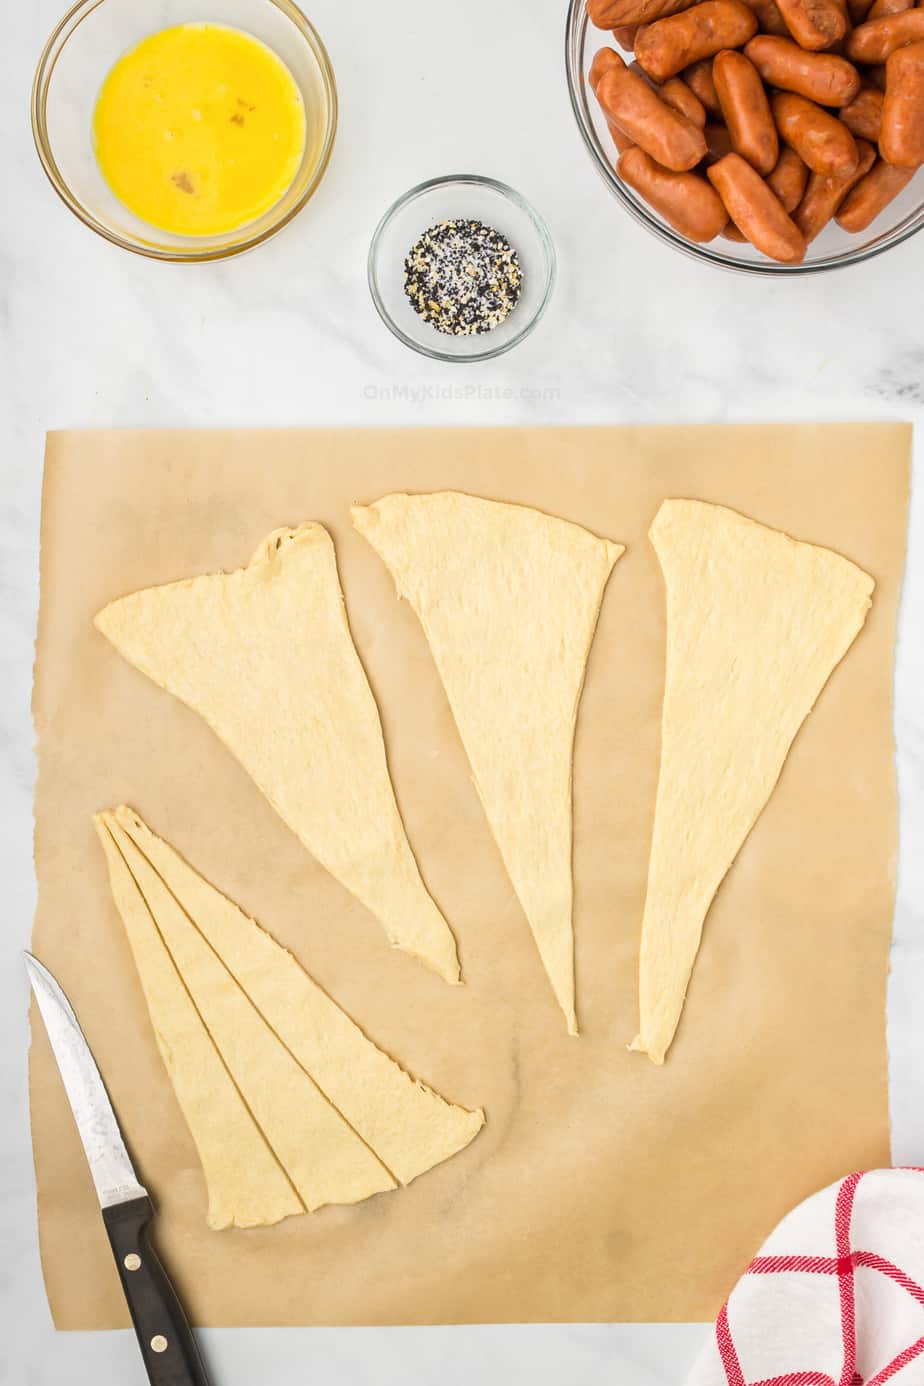 Slicing crescent roll dough into pieces with a knife